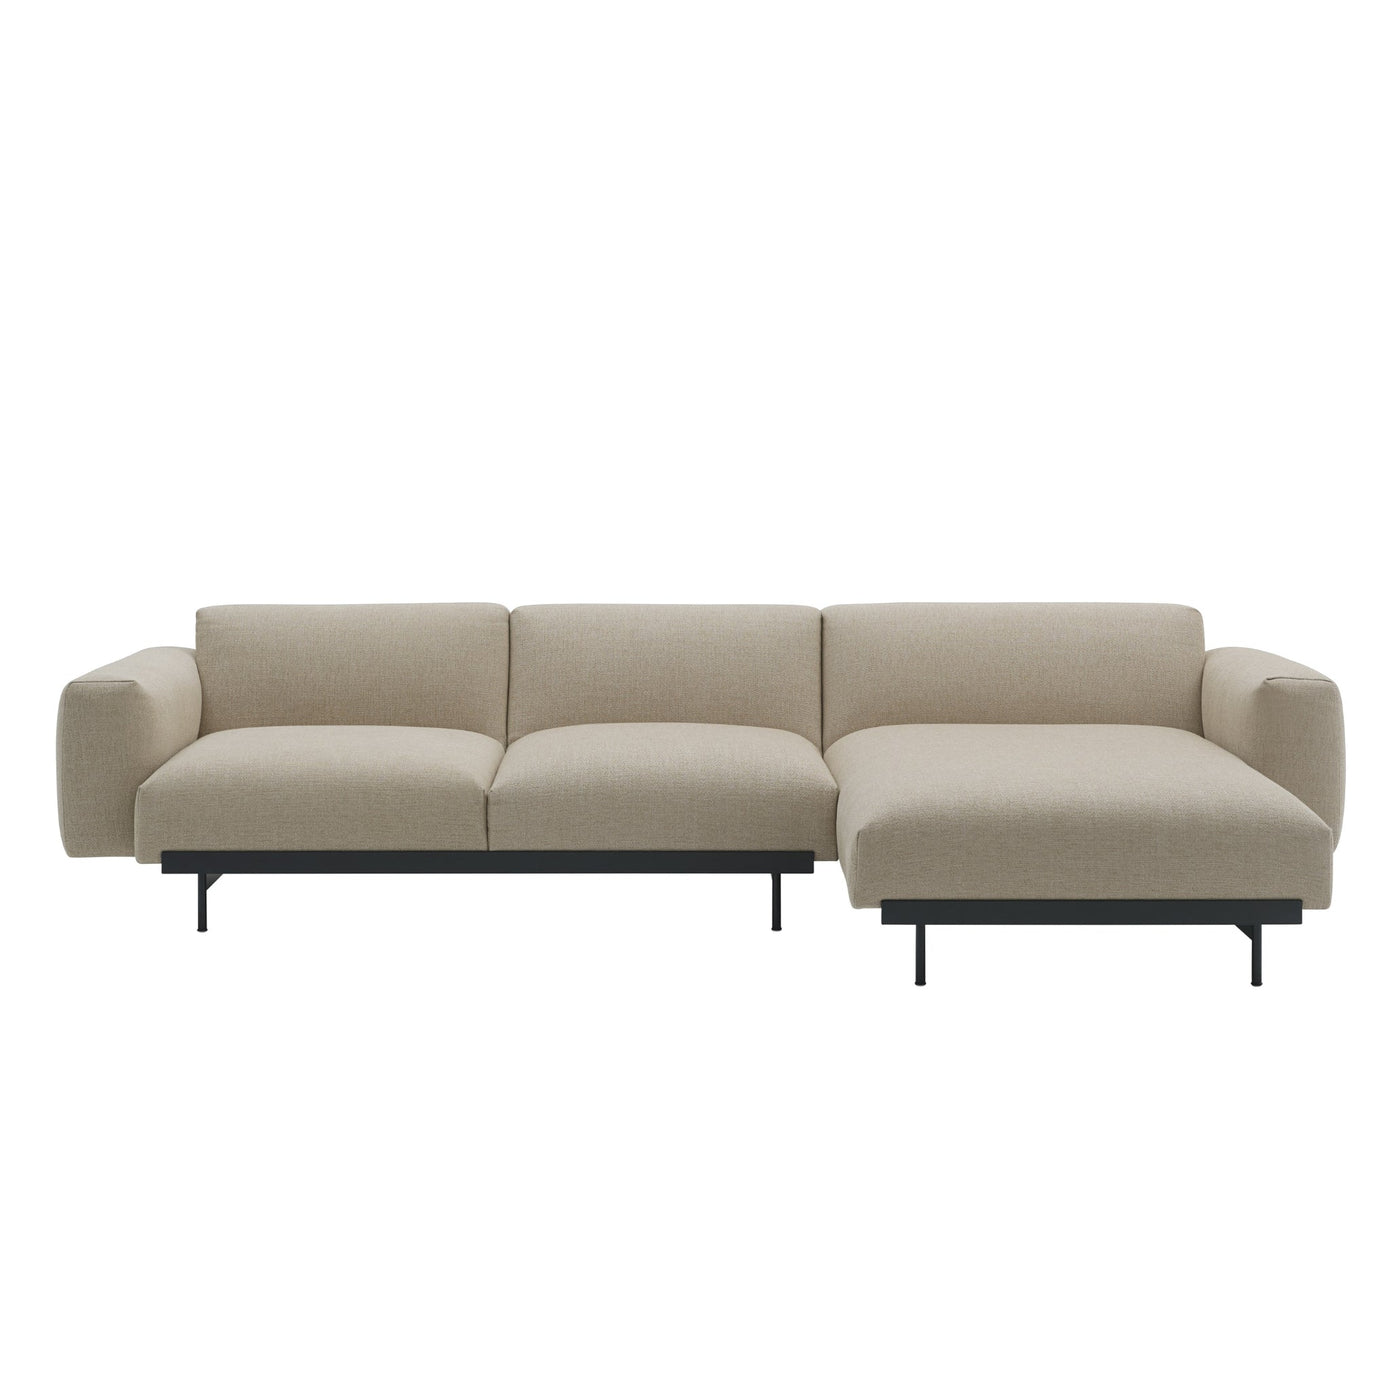 Muuto In Situ Modular 3 Seater Sofa, configuration 6. Made to order from someday designs. #colour_ecriture-240